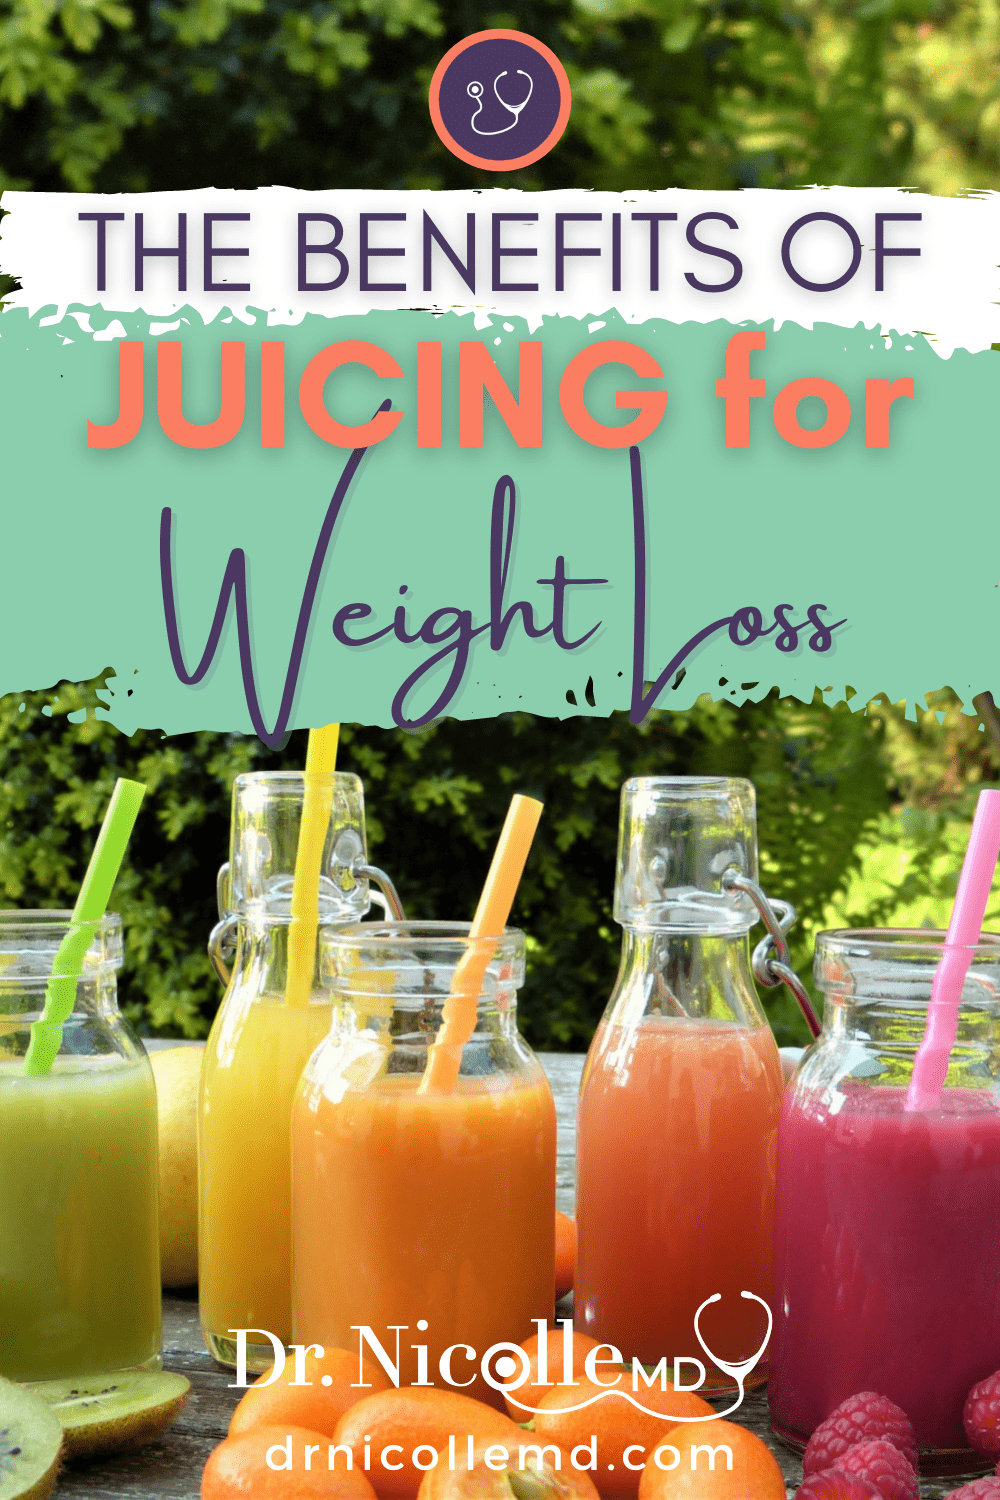 The Benefits of Juicing for Weight Loss